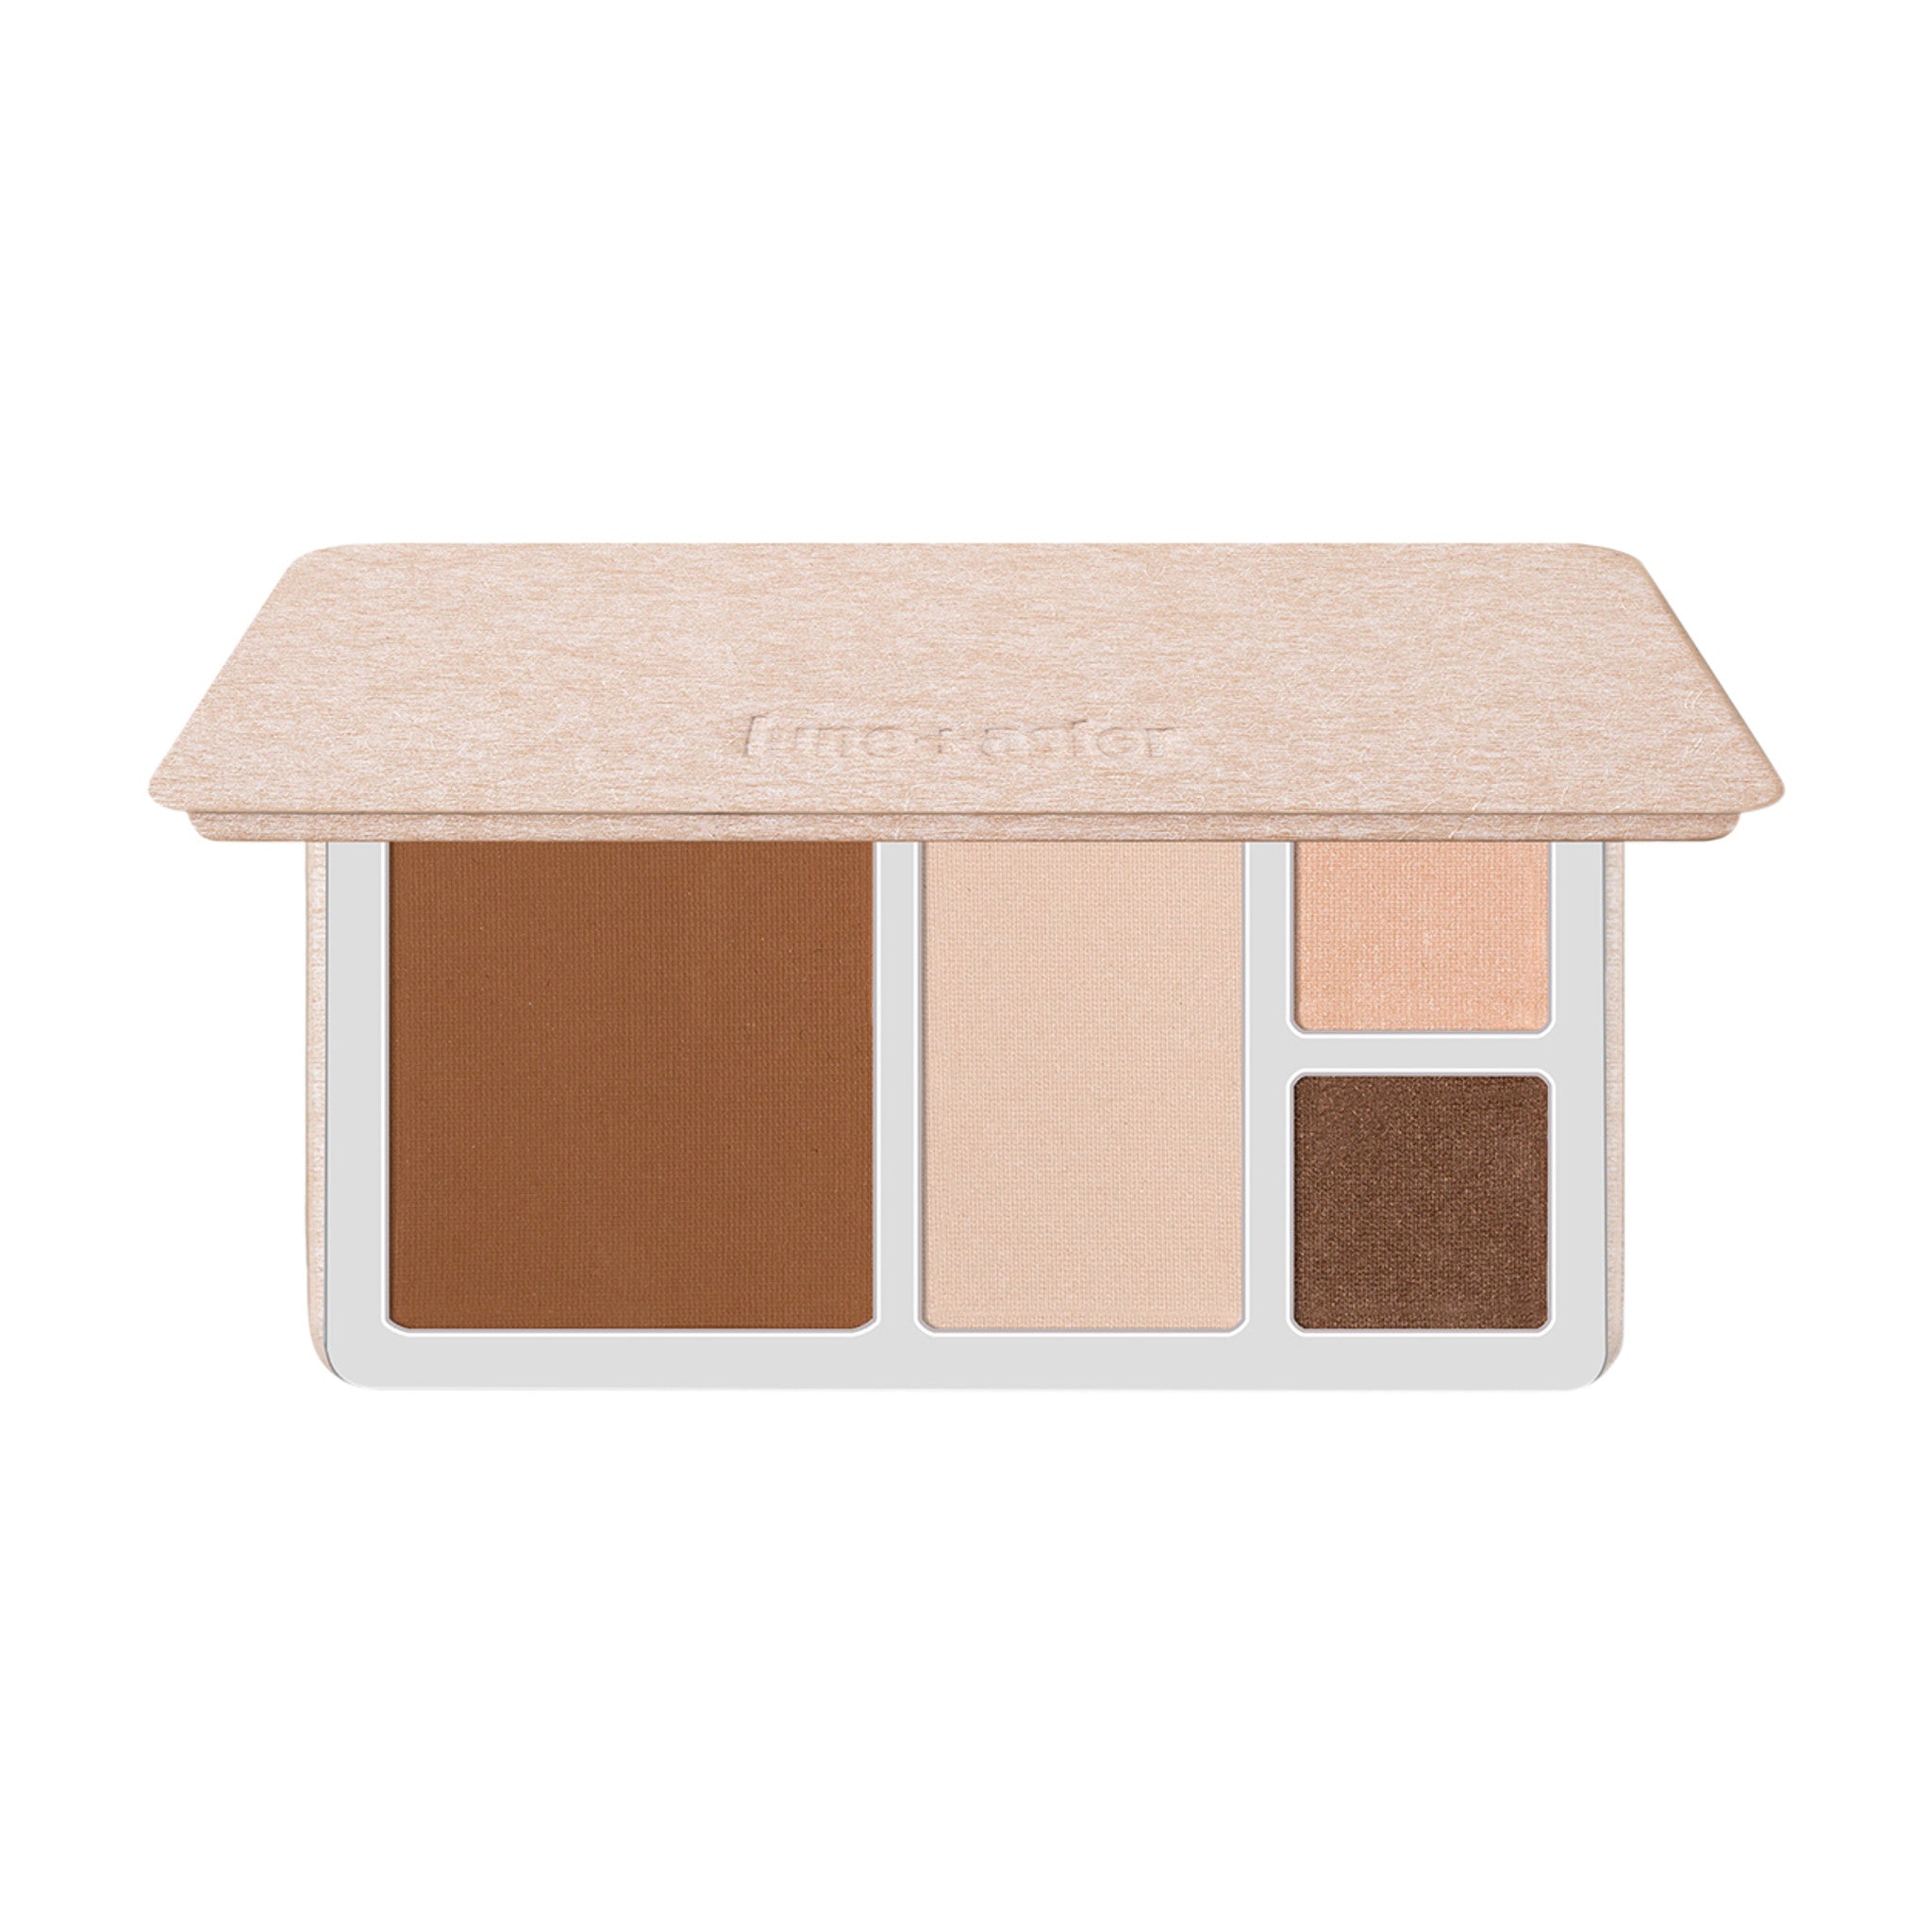 Lune+Aster Daylight Face and Eye Palette main image. This product is in the color nude